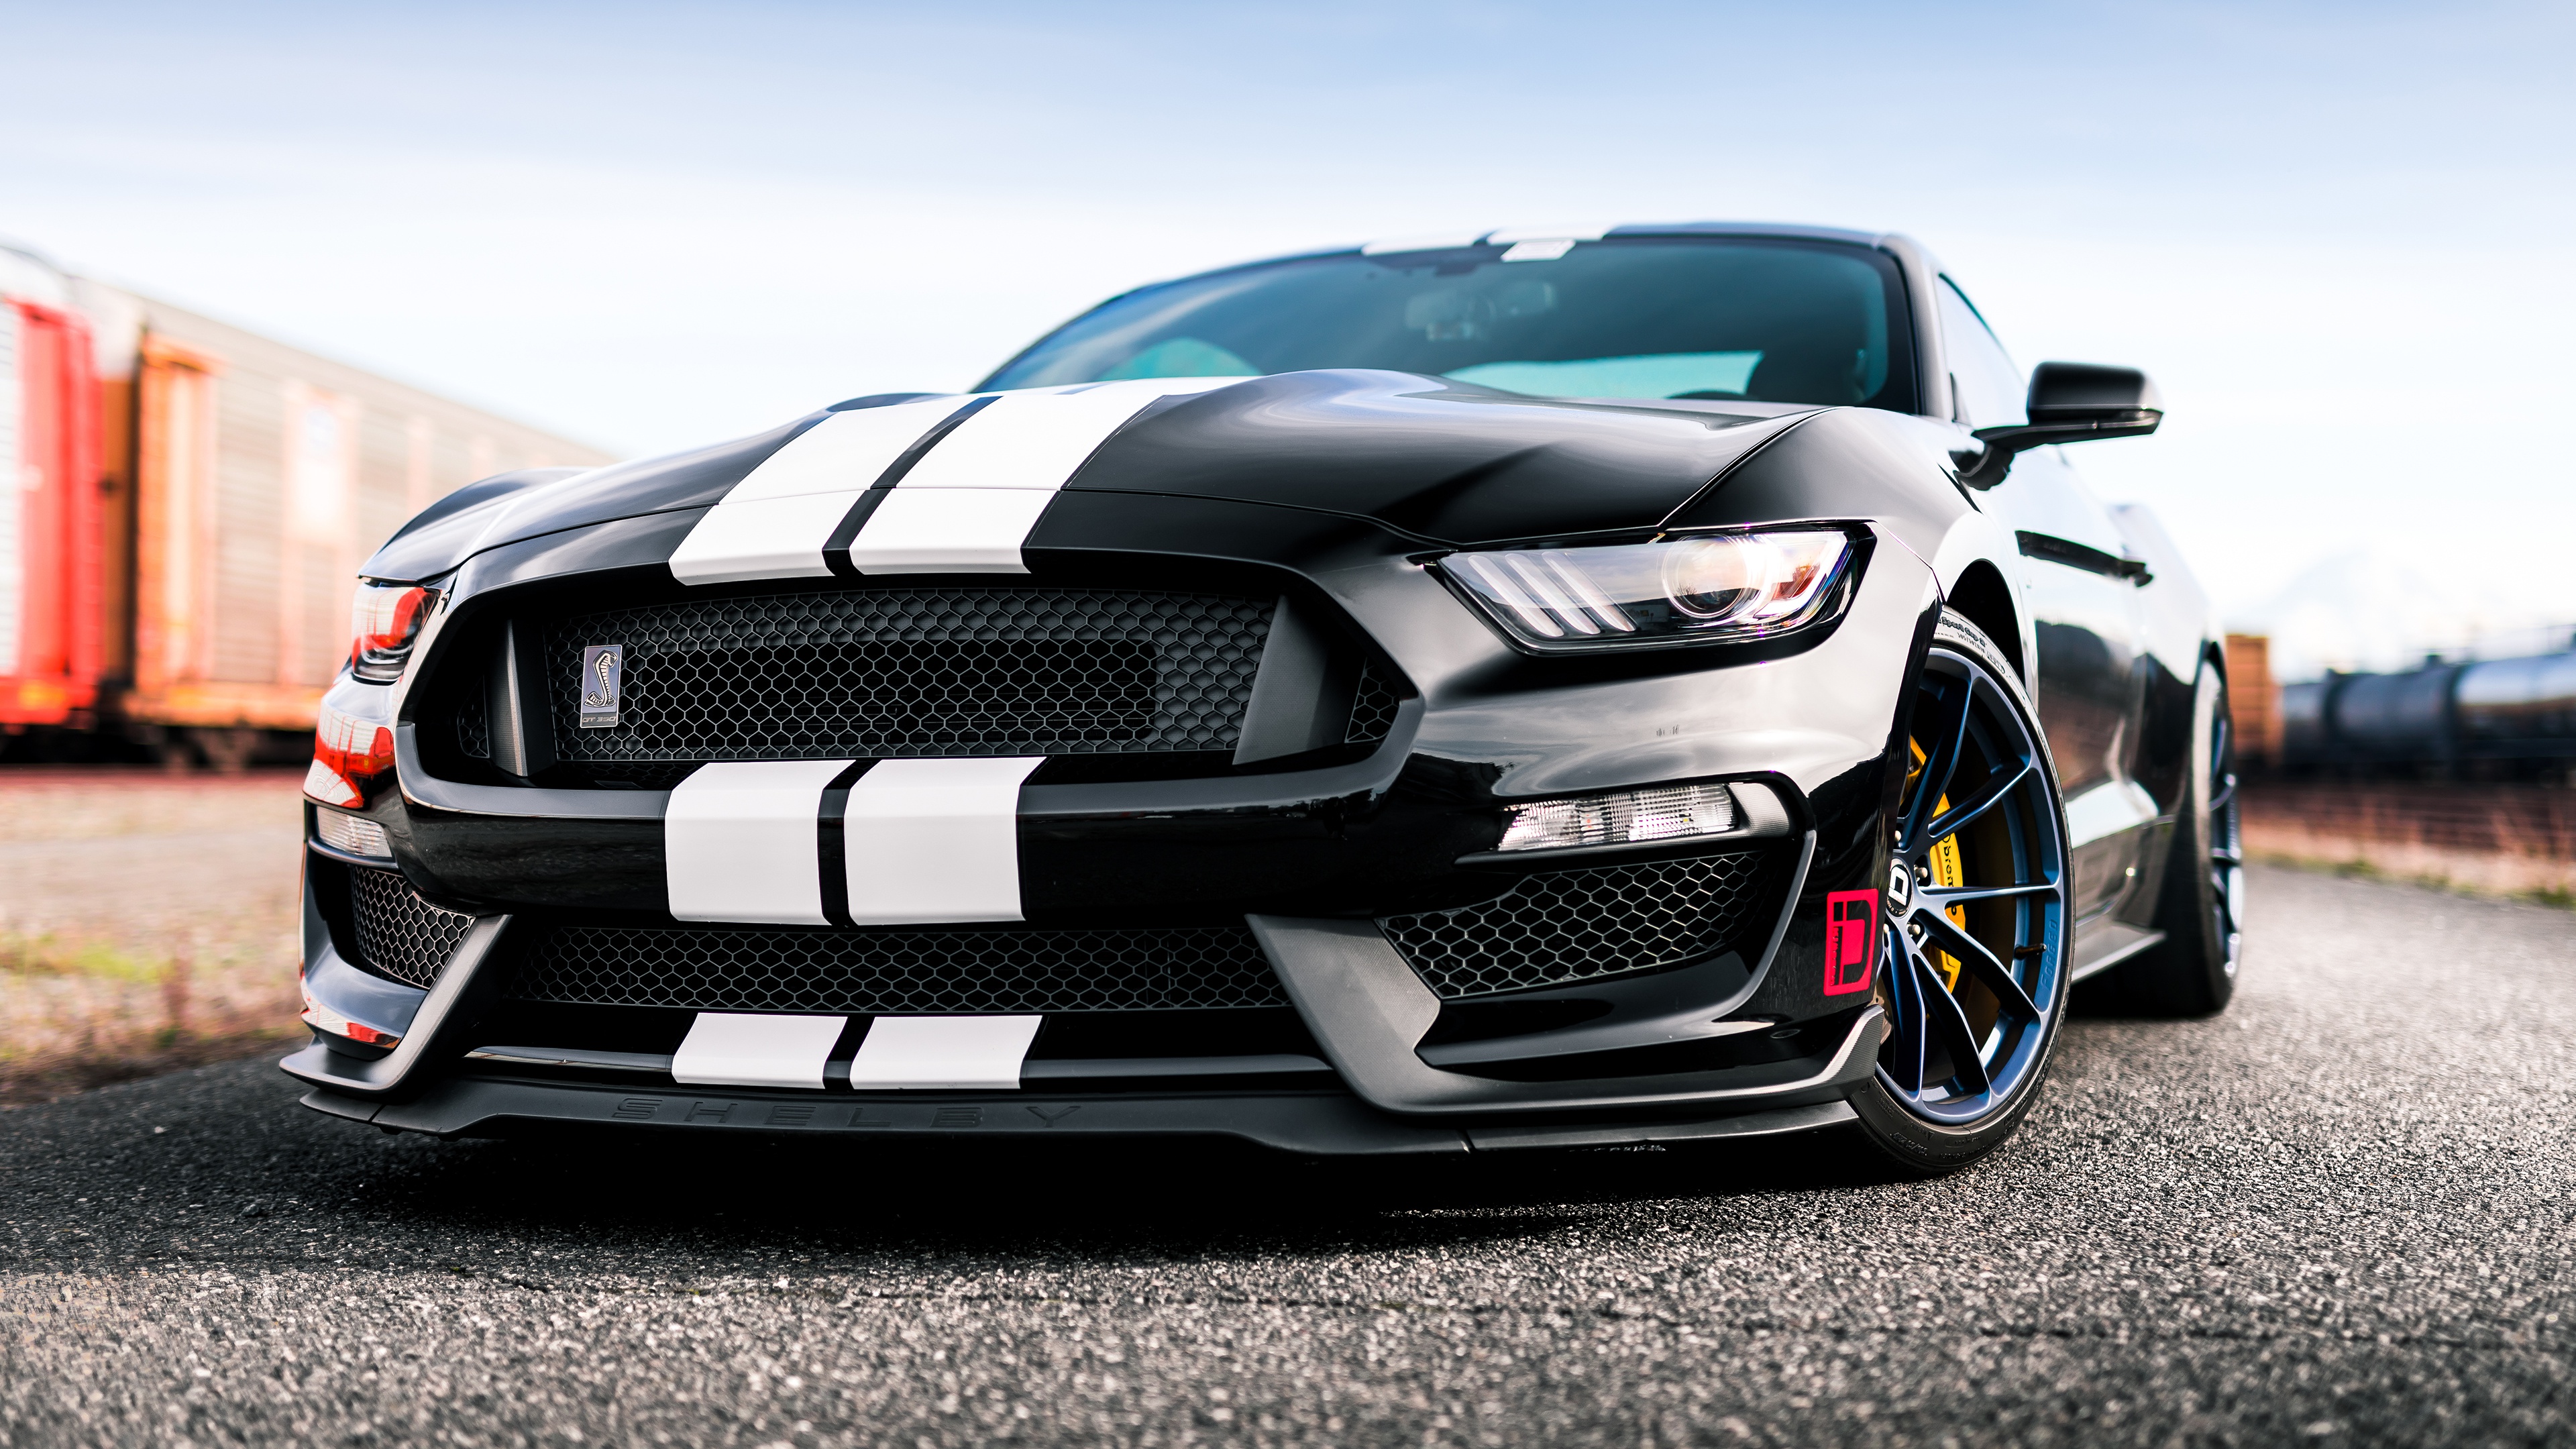 Free download wallpaper Ford, Car, Ford Mustang, Muscle Car, Vehicles, Black Car, Ford Mustang Shelby, Ford Mustang Shelby Gt350 on your PC desktop